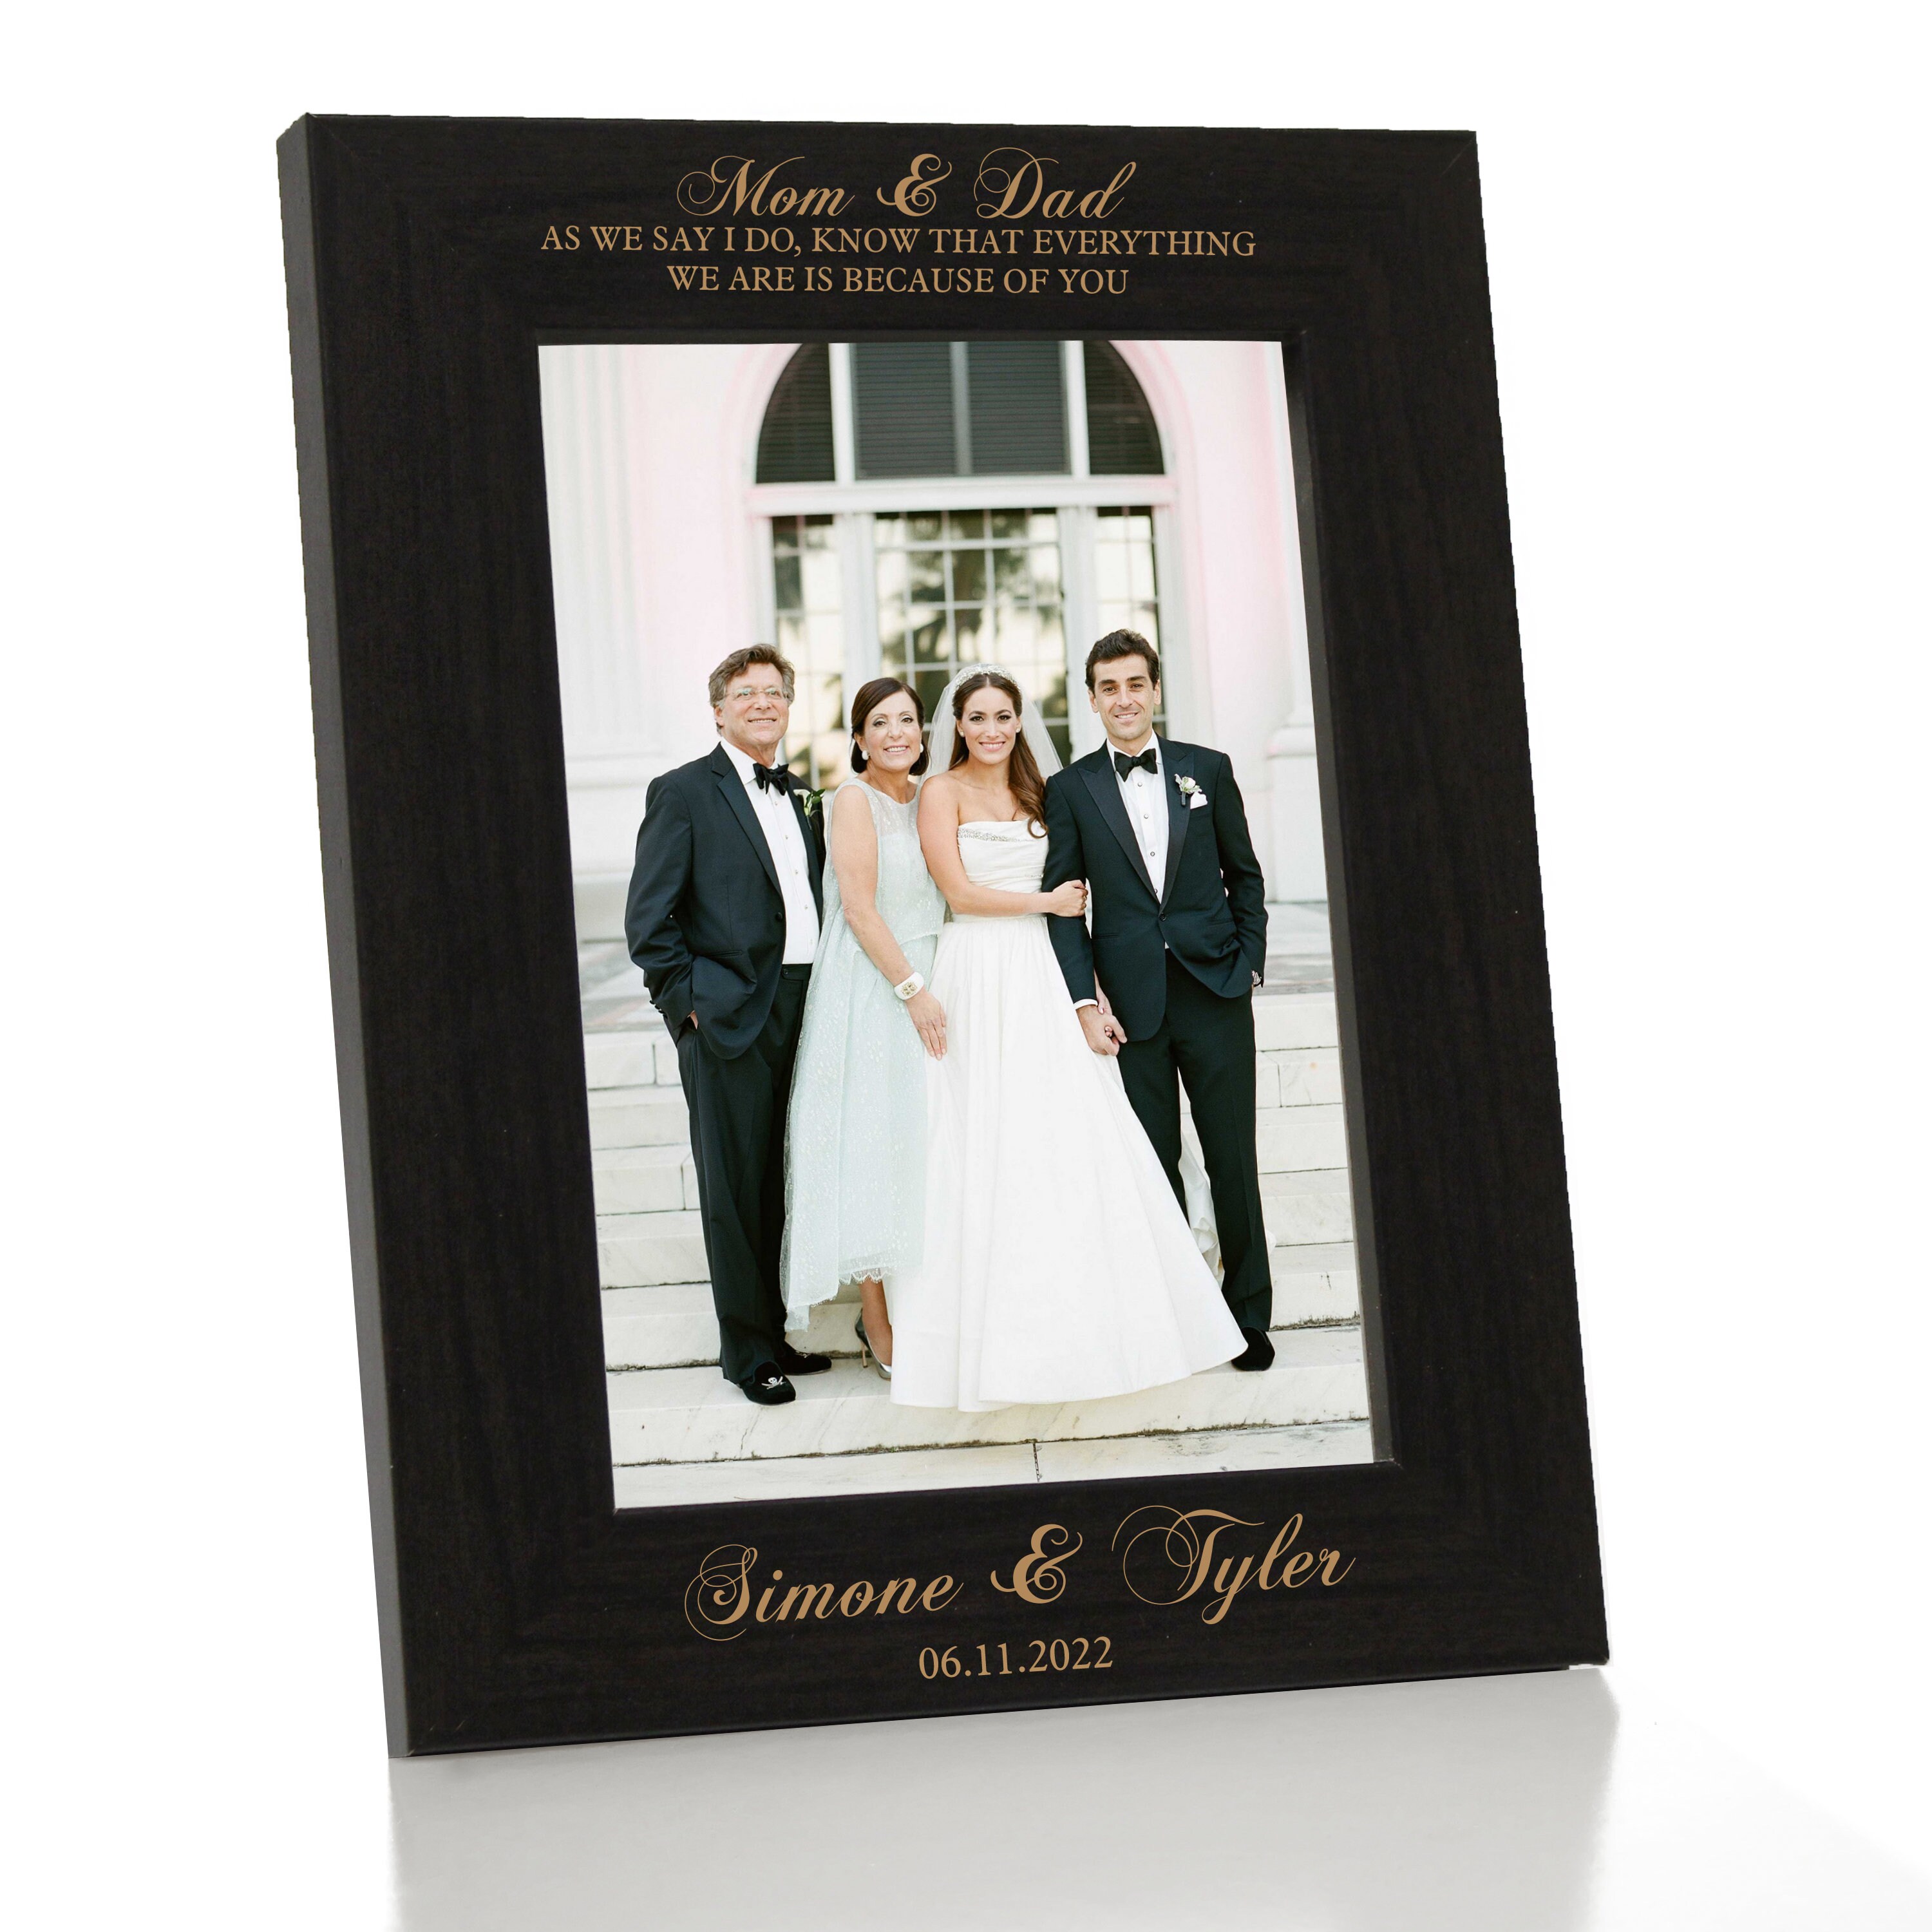 FDFHOME Mother of The Groom Gifts, Wood Picture Frame Holds 4 x 6 Photo, Father of The Groom Gift, Wedding Gift for Parents from Groom, Today A